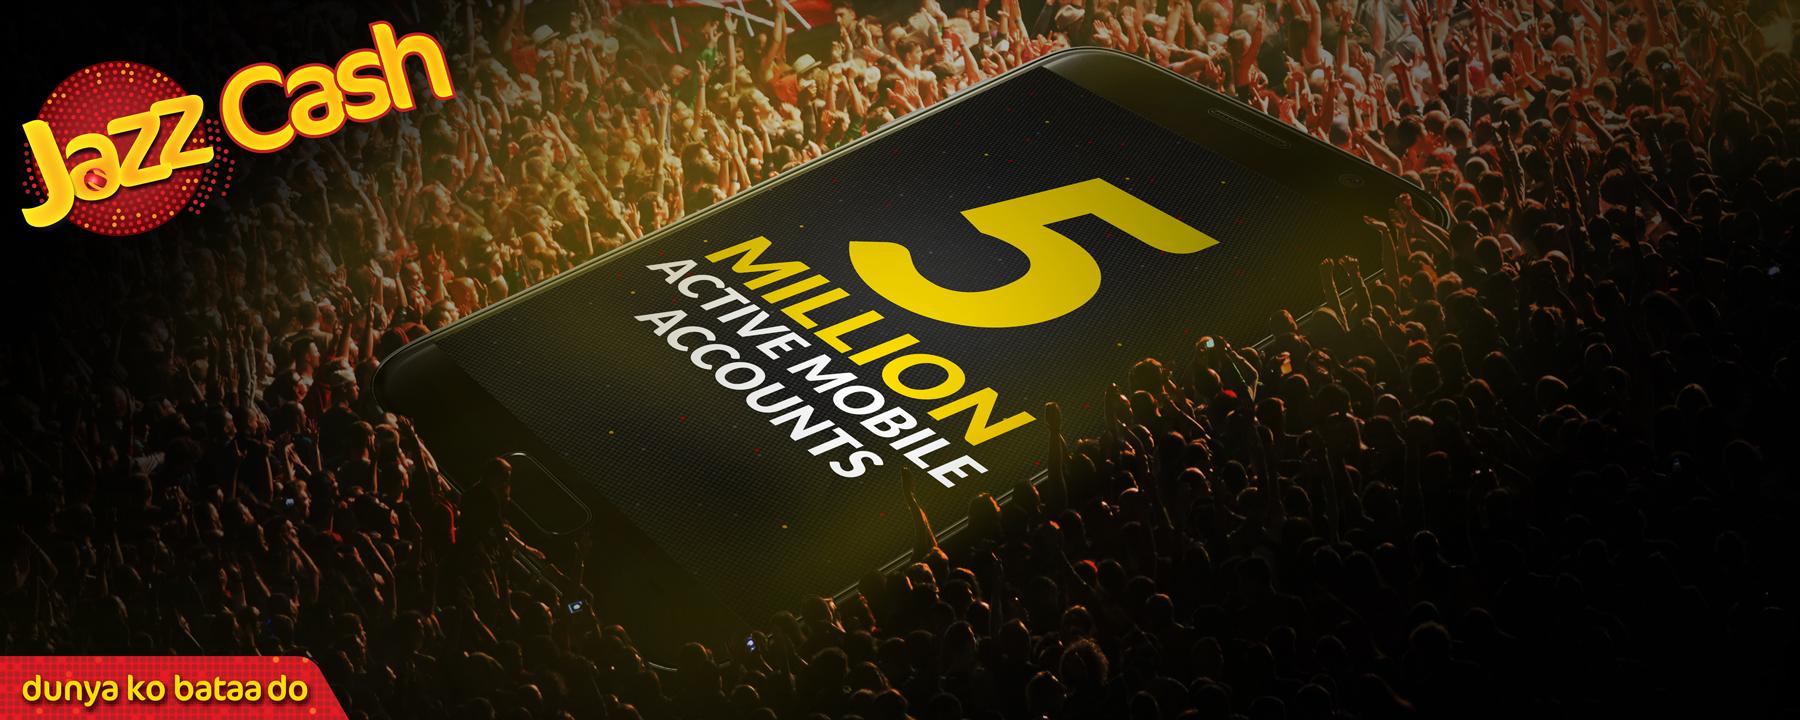 JazzCash achieves 5 million Monthly Active Mobile Account Subscribers